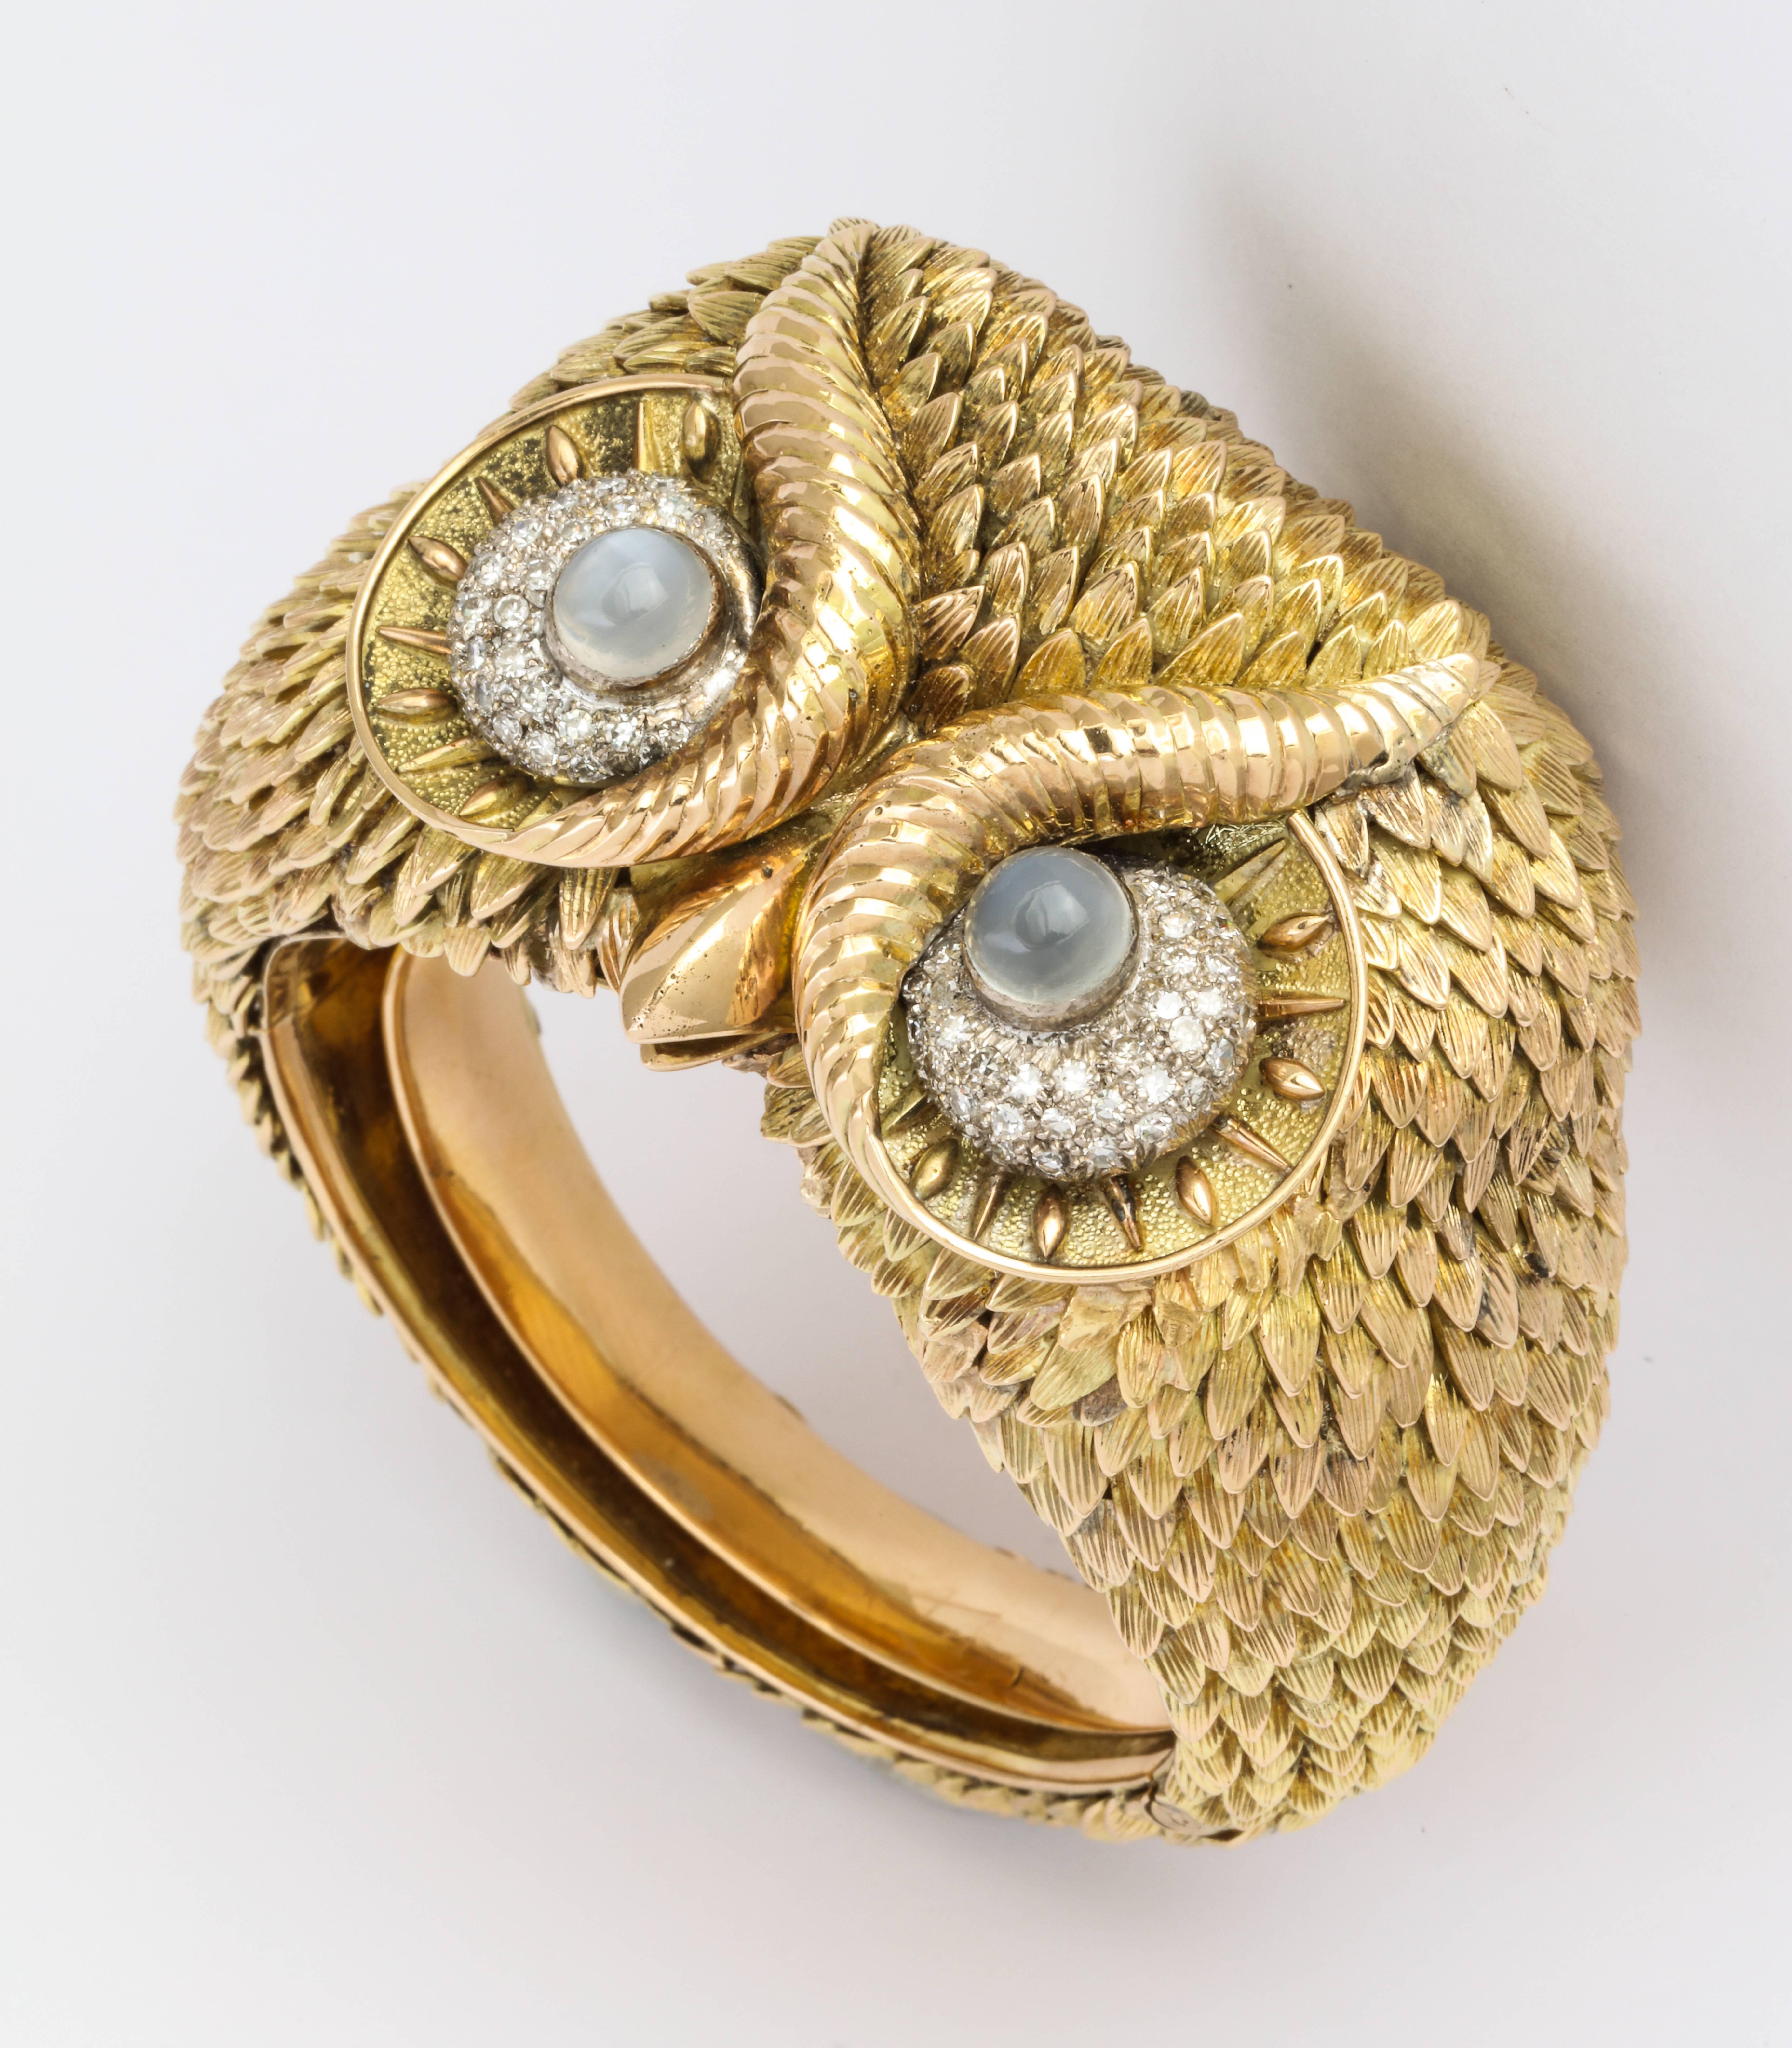 Made to order in the 1960s this exceptional figural owl bracelet is completely hand crafted of 14K gold with each feather individually formed and applied in curved layers forming a sculpture for the wrist set with star moonstone eyes  surrounded by